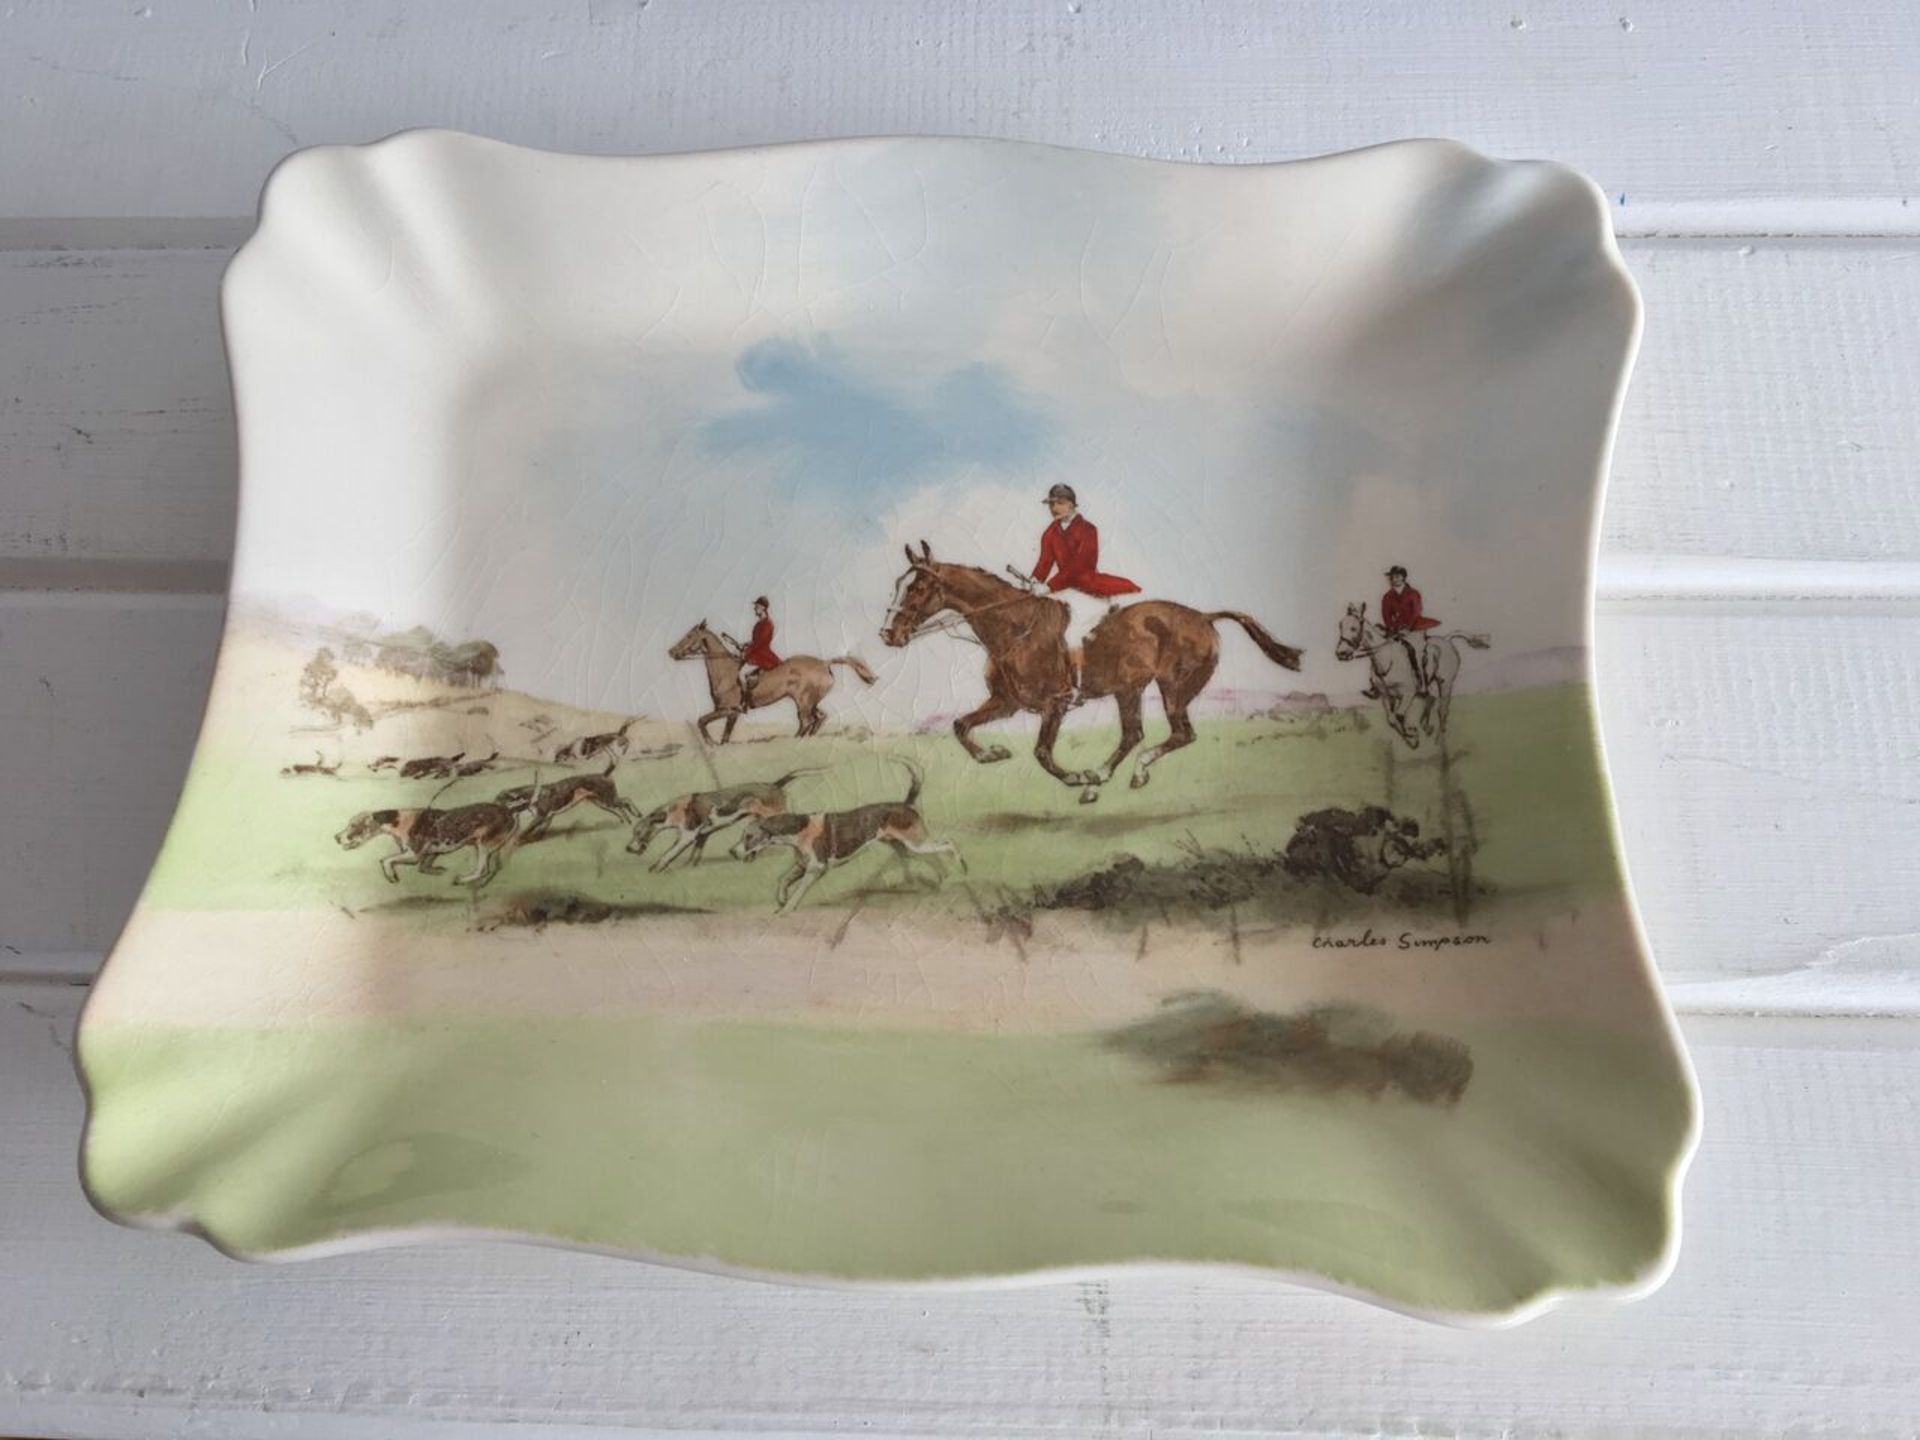 RARE ROYAL DOULTON SERIES WARE DISH "ACROSS THE MOOR" D6326, CHARLES SIMPSON. PRINTED MARKS TO BASE.